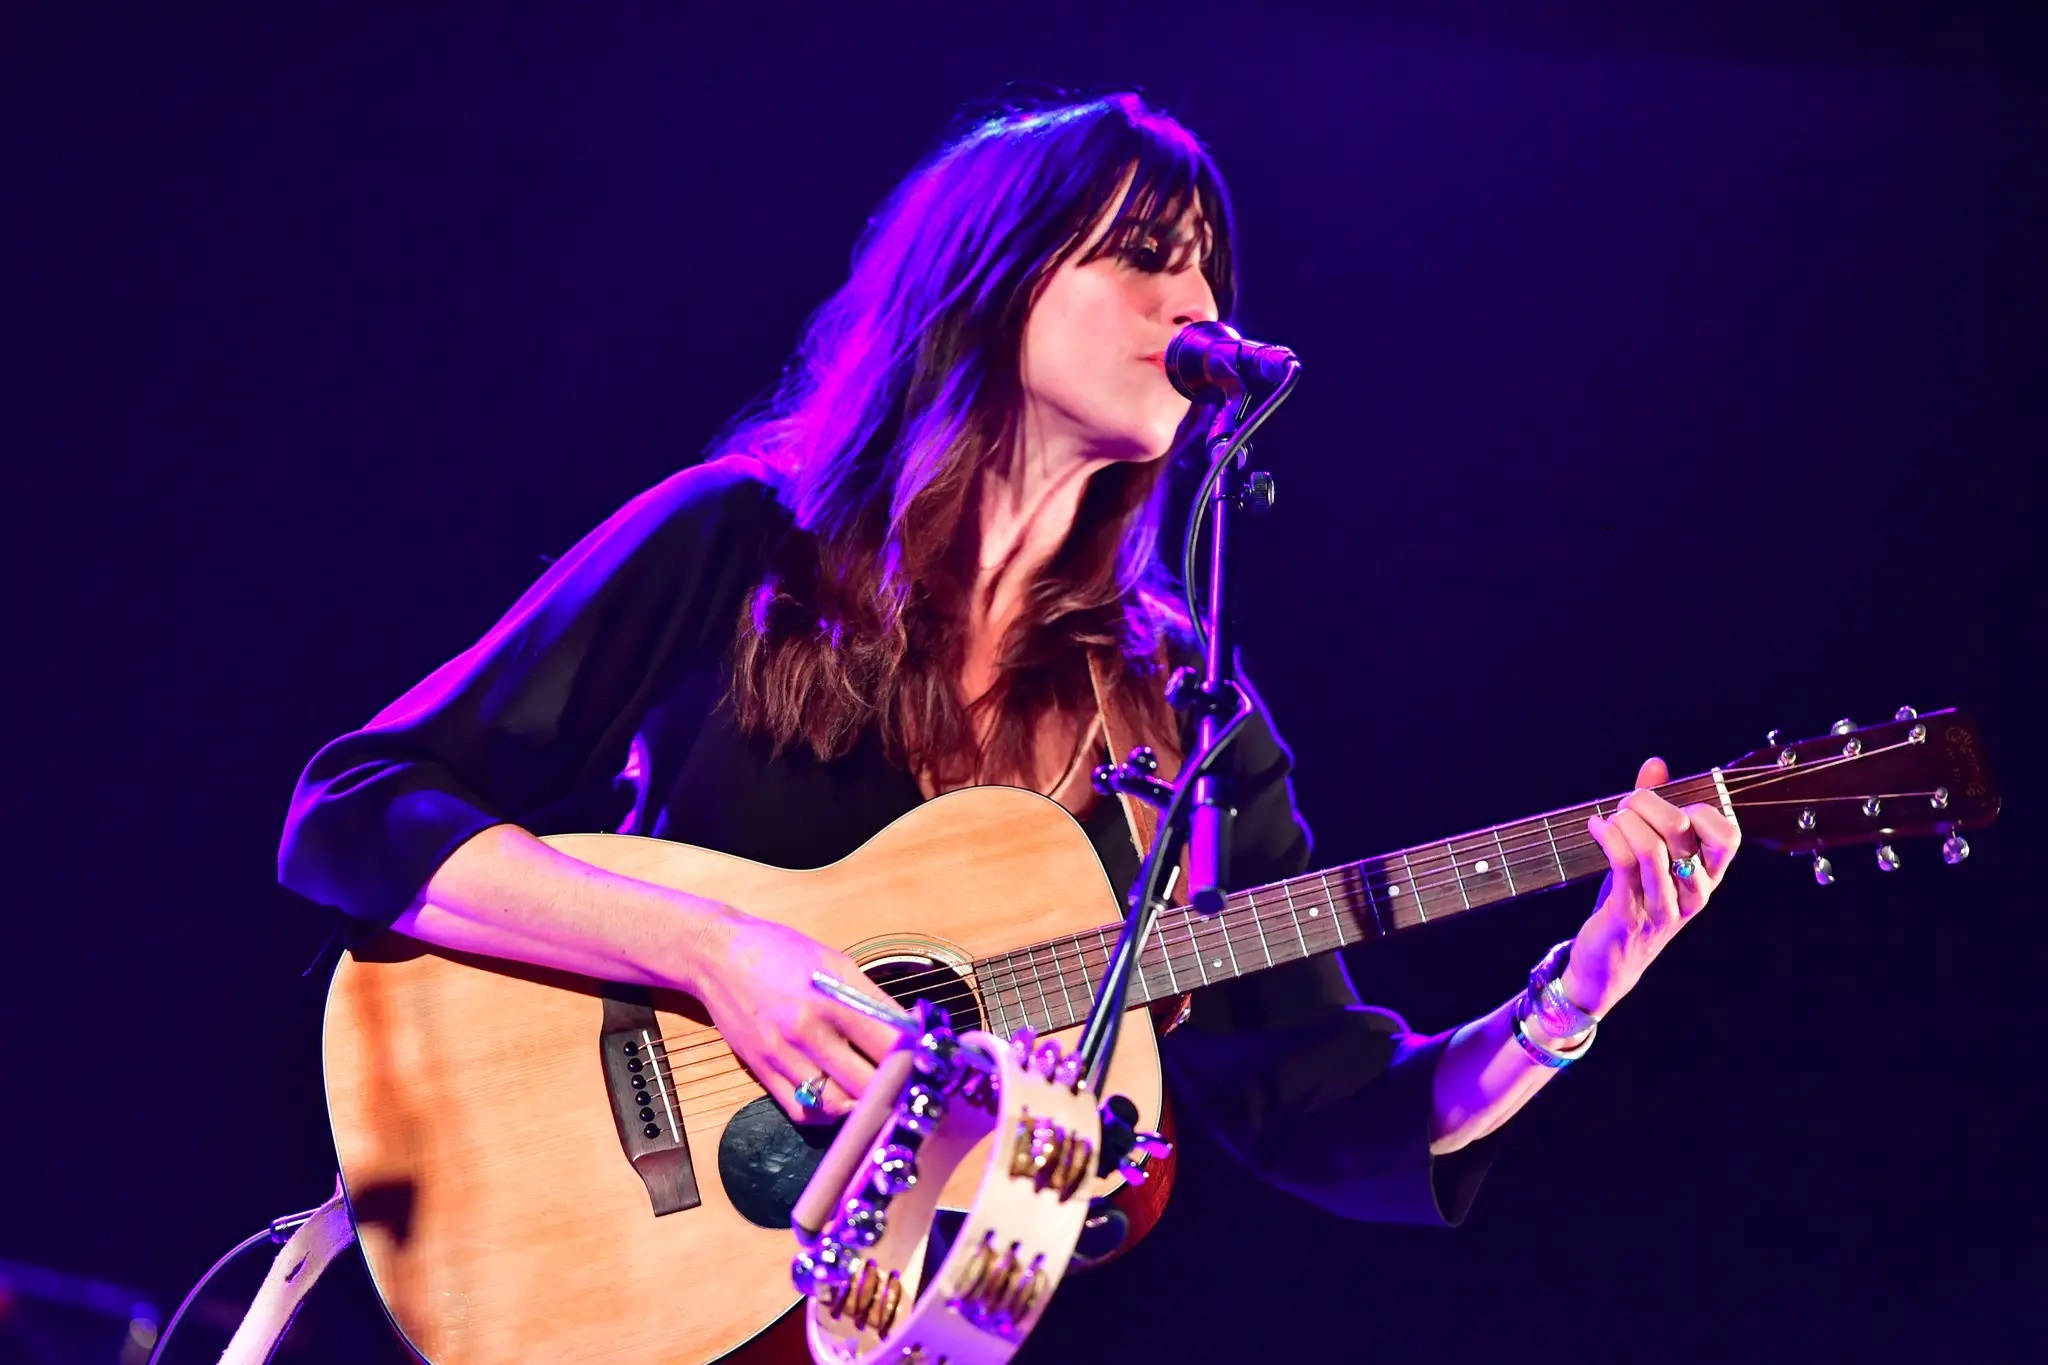 THE BEAT GOES ON – NICKI BLUHM SINGS CHER